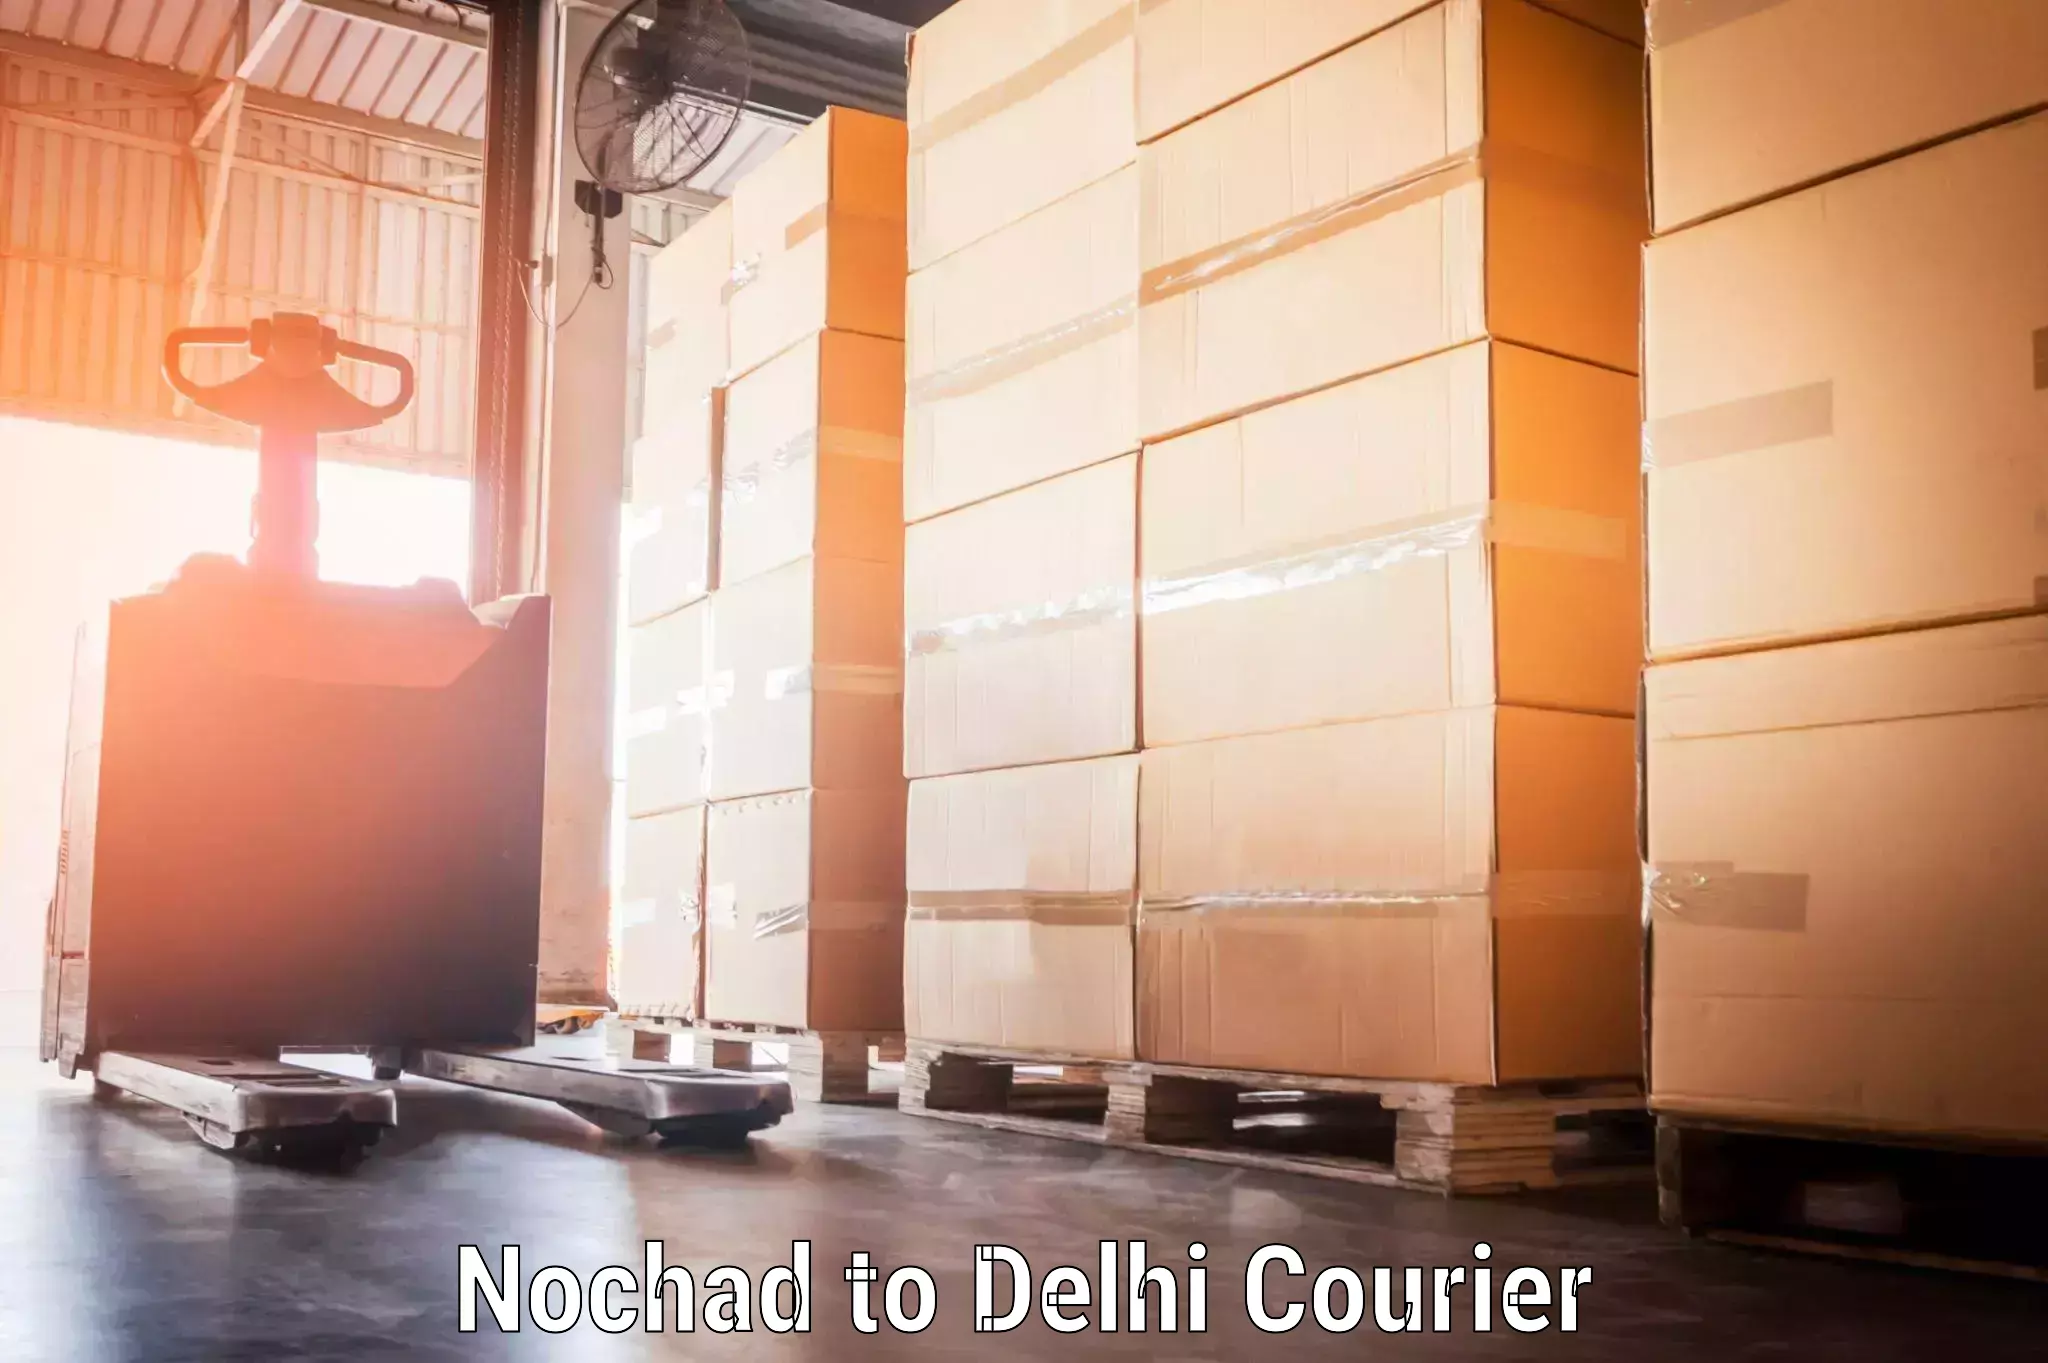 Automated luggage transport in Nochad to Delhi